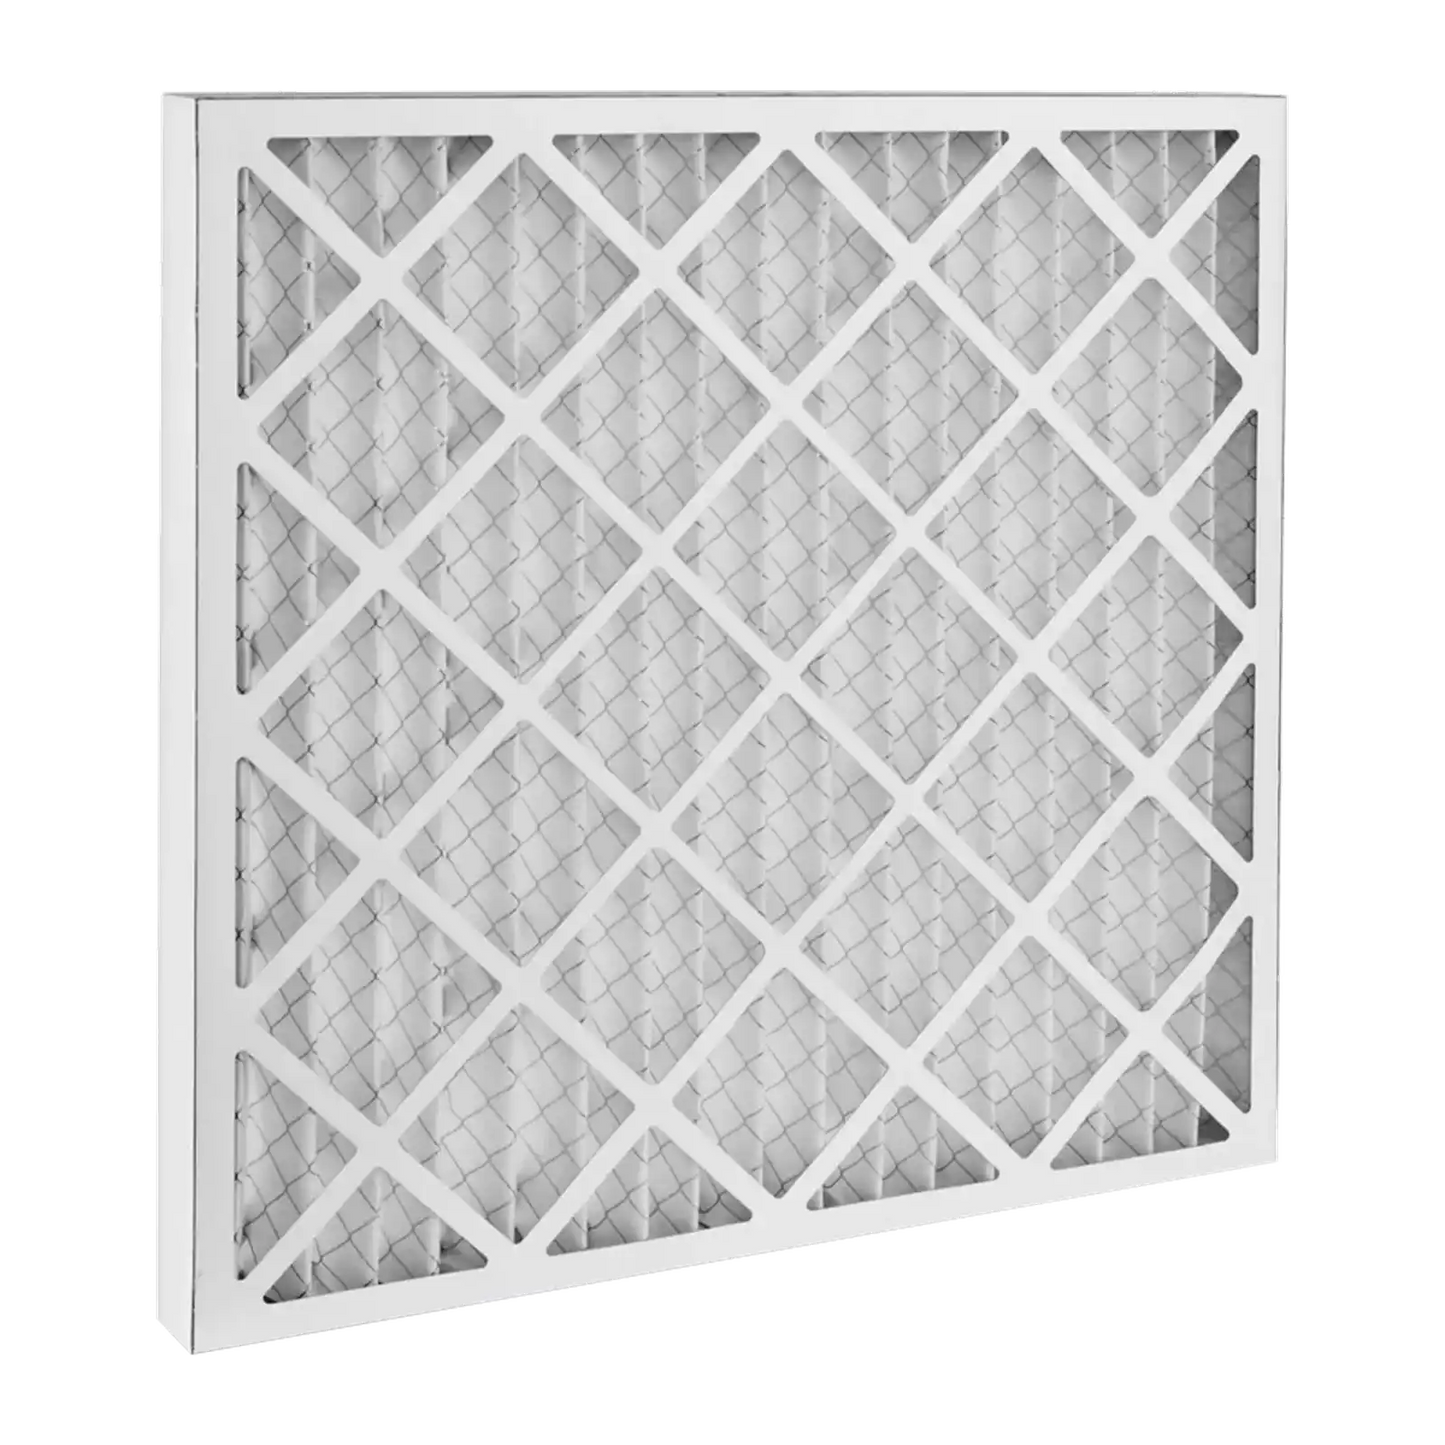 Dafco 20x20x1 Furnace AC Filter - Case of 12